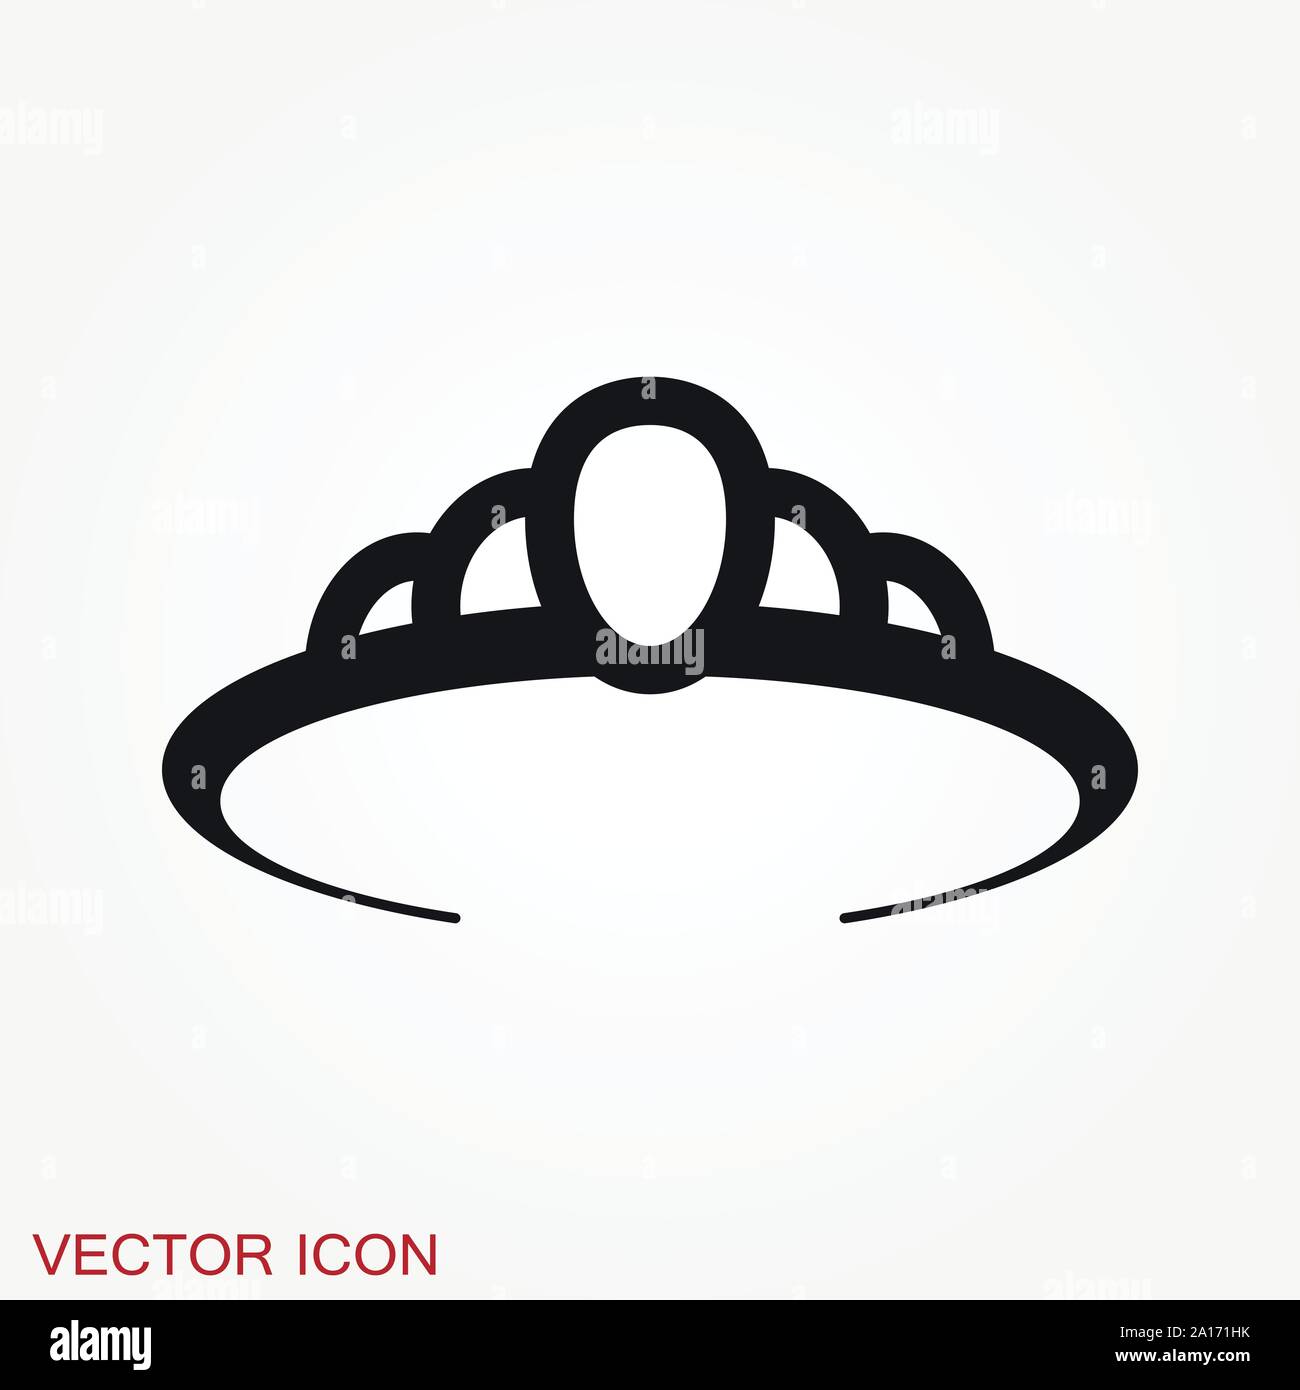 Vector Diadem icon in flat style. Royalty crown illustration pictogram. Stock Vector